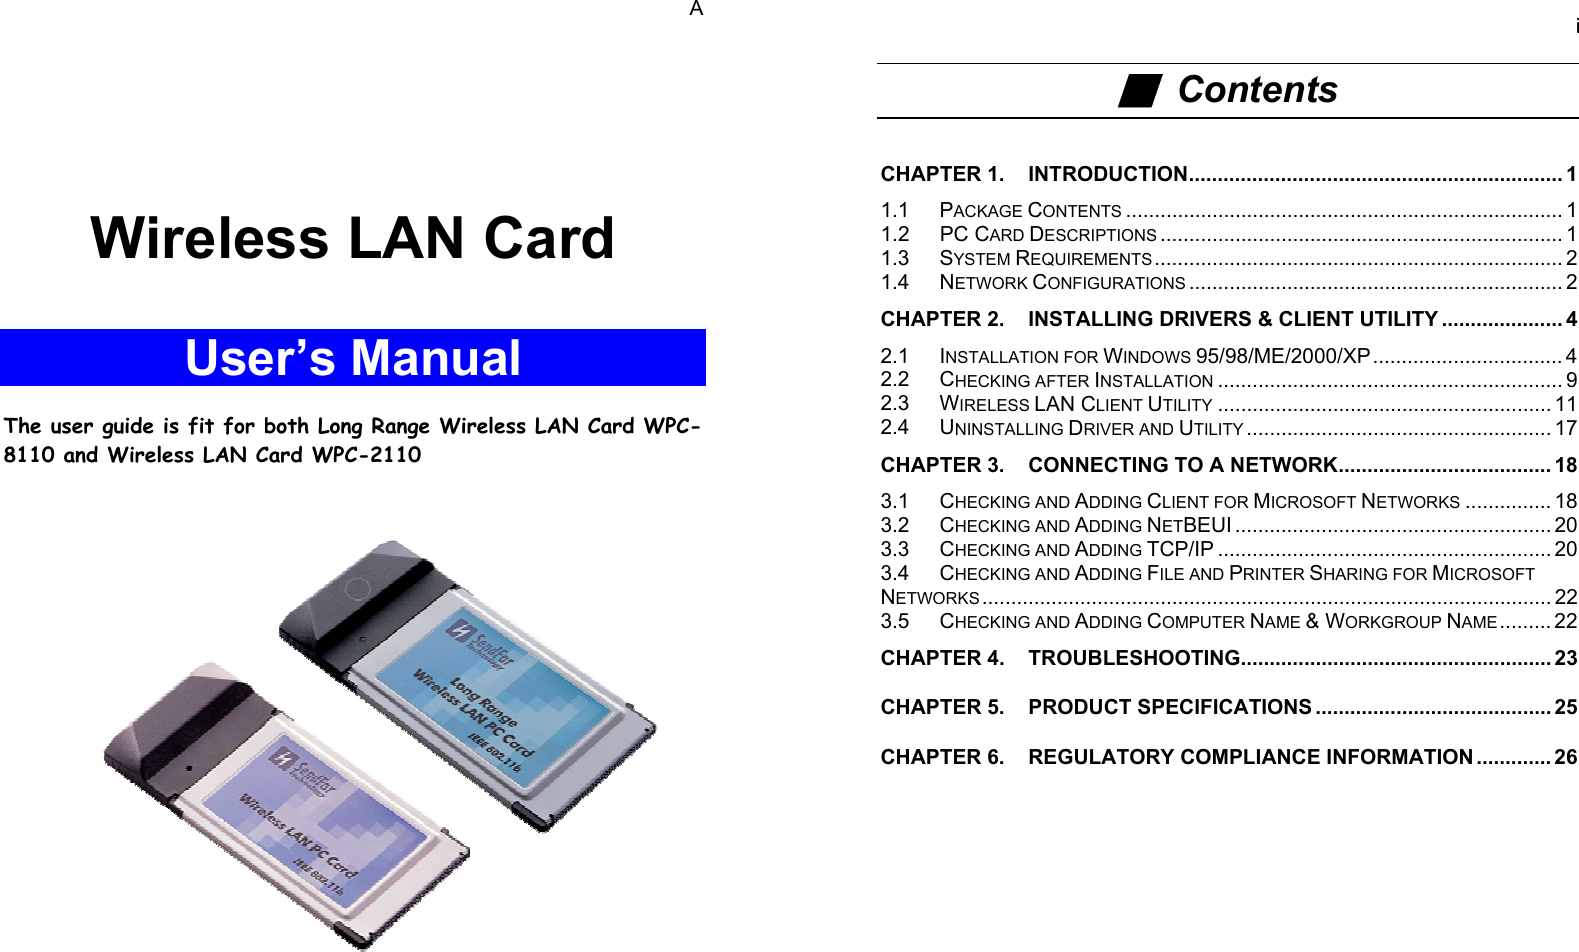 AWireless LAN CardUser’s ManualThe user guide is fit for both Long Range Wireless LAN Card WPC-8110 and Wireless LAN Card WPC-2110i■  ContentsCHAPTER 1. INTRODUCTION................................................................. 11.1 PACKAGE CONTENTS ............................................................................ 11.2 PC CARD DESCRIPTIONS ...................................................................... 11.3 SYSTEM REQUIREMENTS ....................................................................... 21.4 NETWORK CONFIGURATIONS ................................................................. 2CHAPTER 2. INSTALLING DRIVERS &amp; CLIENT UTILITY ..................... 42.1 INSTALLATION FOR WINDOWS 95/98/ME/2000/XP................................. 42.2 CHECKING AFTER INSTALLATION ............................................................ 92.3 WIRELESS LAN CLIENT UTILITY .......................................................... 112.4 UNINSTALLING DRIVER AND UTILITY ..................................................... 17CHAPTER 3. CONNECTING TO A NETWORK..................................... 183.1 CHECKING AND ADDING CLIENT FOR MICROSOFT NETWORKS ............... 183.2 CHECKING AND ADDING NETBEUI ....................................................... 203.3 CHECKING AND ADDING TCP/IP .......................................................... 203.4 CHECKING AND ADDING FILE AND PRINTER SHARING FOR MICROSOFTNETWORKS ................................................................................................... 223.5 CHECKING AND ADDING COMPUTER NAME &amp; WORKGROUP NAME......... 22CHAPTER 4. TROUBLESHOOTING...................................................... 23CHAPTER 5. PRODUCT SPECIFICATIONS ......................................... 25CHAPTER 6. REGULATORY COMPLIANCE INFORMATION ............. 26